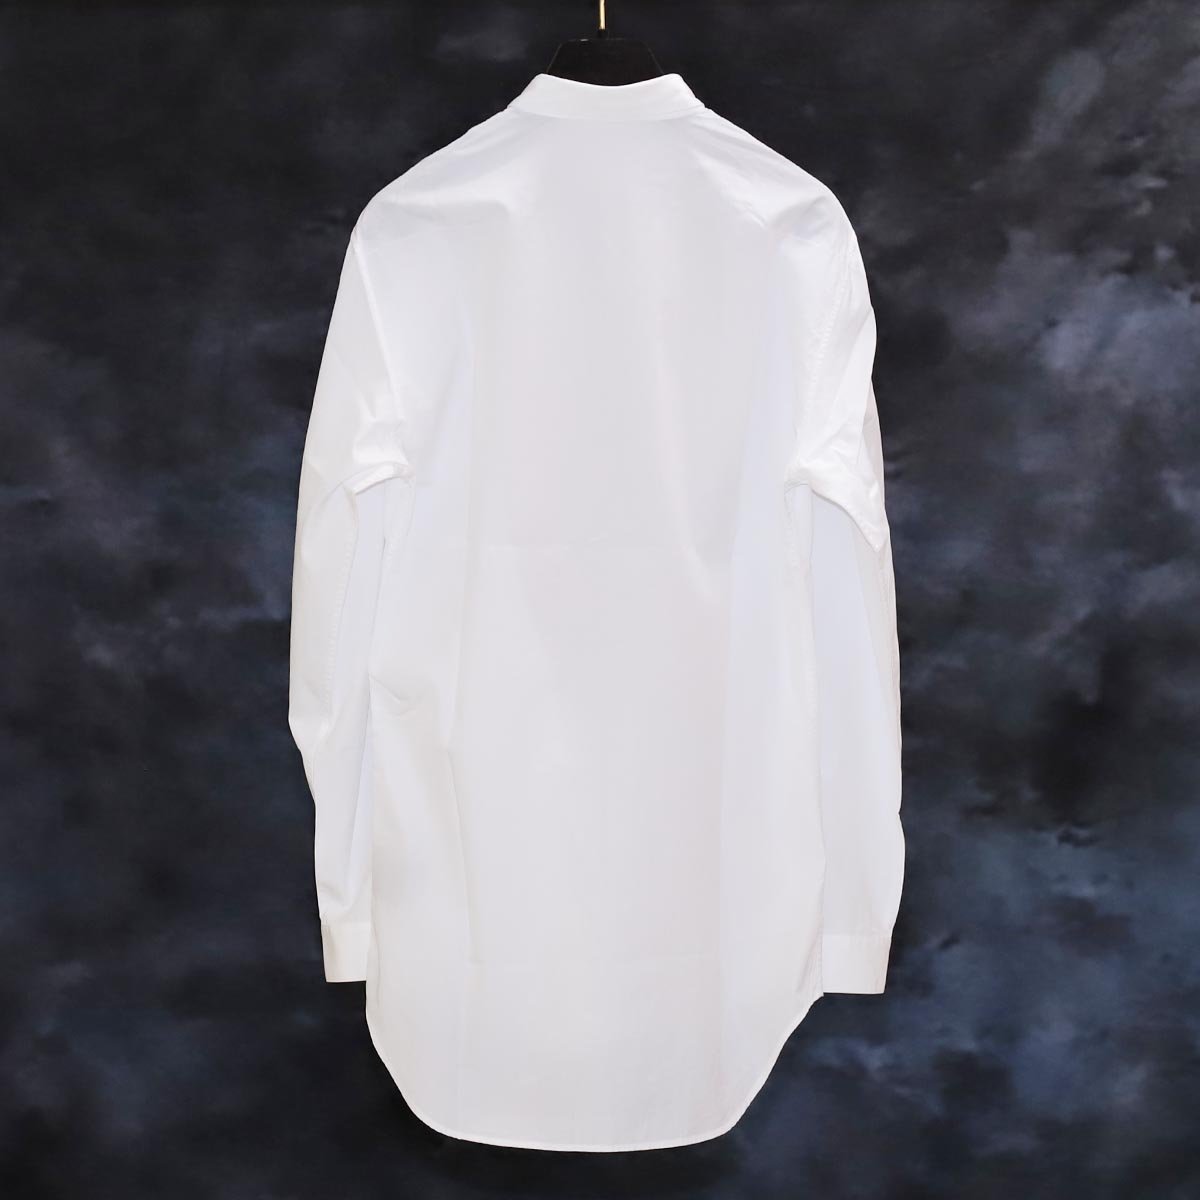  genuine article finest quality goods Dior Homme top class Italy made Thai knee color cotton dress shirt men's 37 white long sleeve tops Dior HOMME